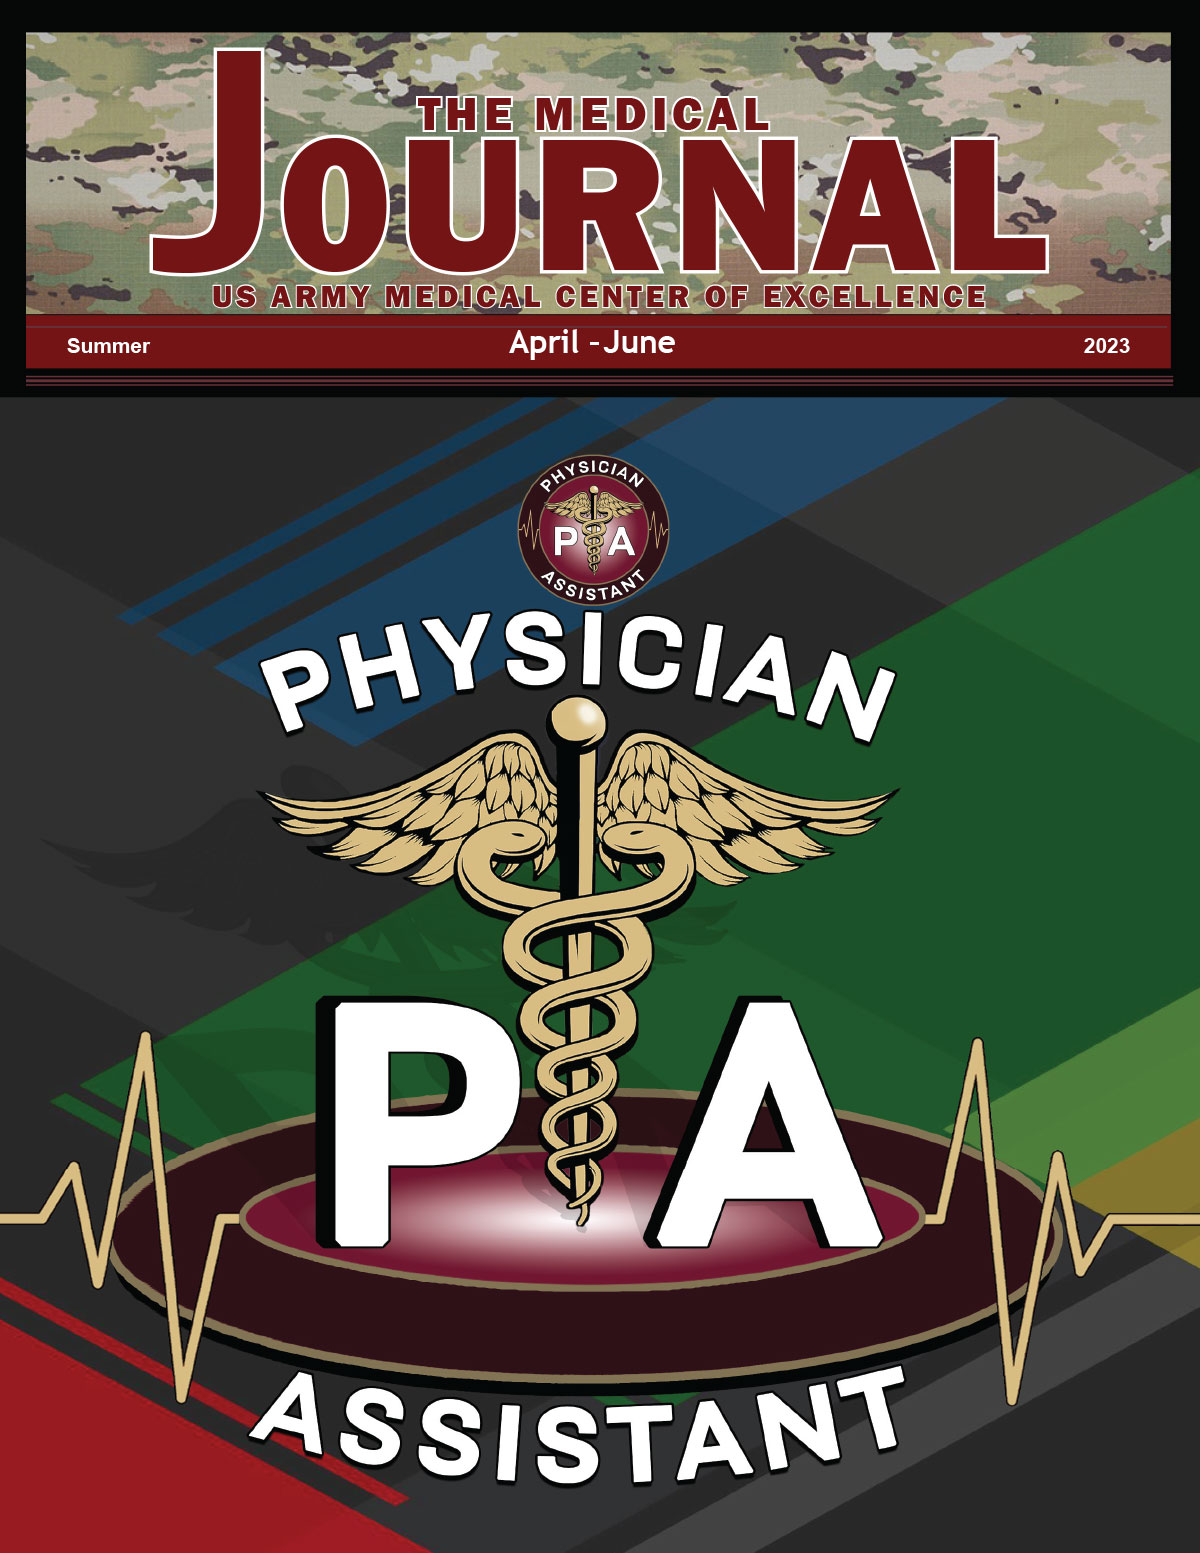 The image is the cover of The Medical Journal, a publication by the US Army Medical Center of Excellence for the summer period of April June 2023. It features a caduceus with the letters PA for Physician Assistant, set against a backdrop of intersecting lines and a heart rate monitor graphic, with a camouflage pattern at the top.